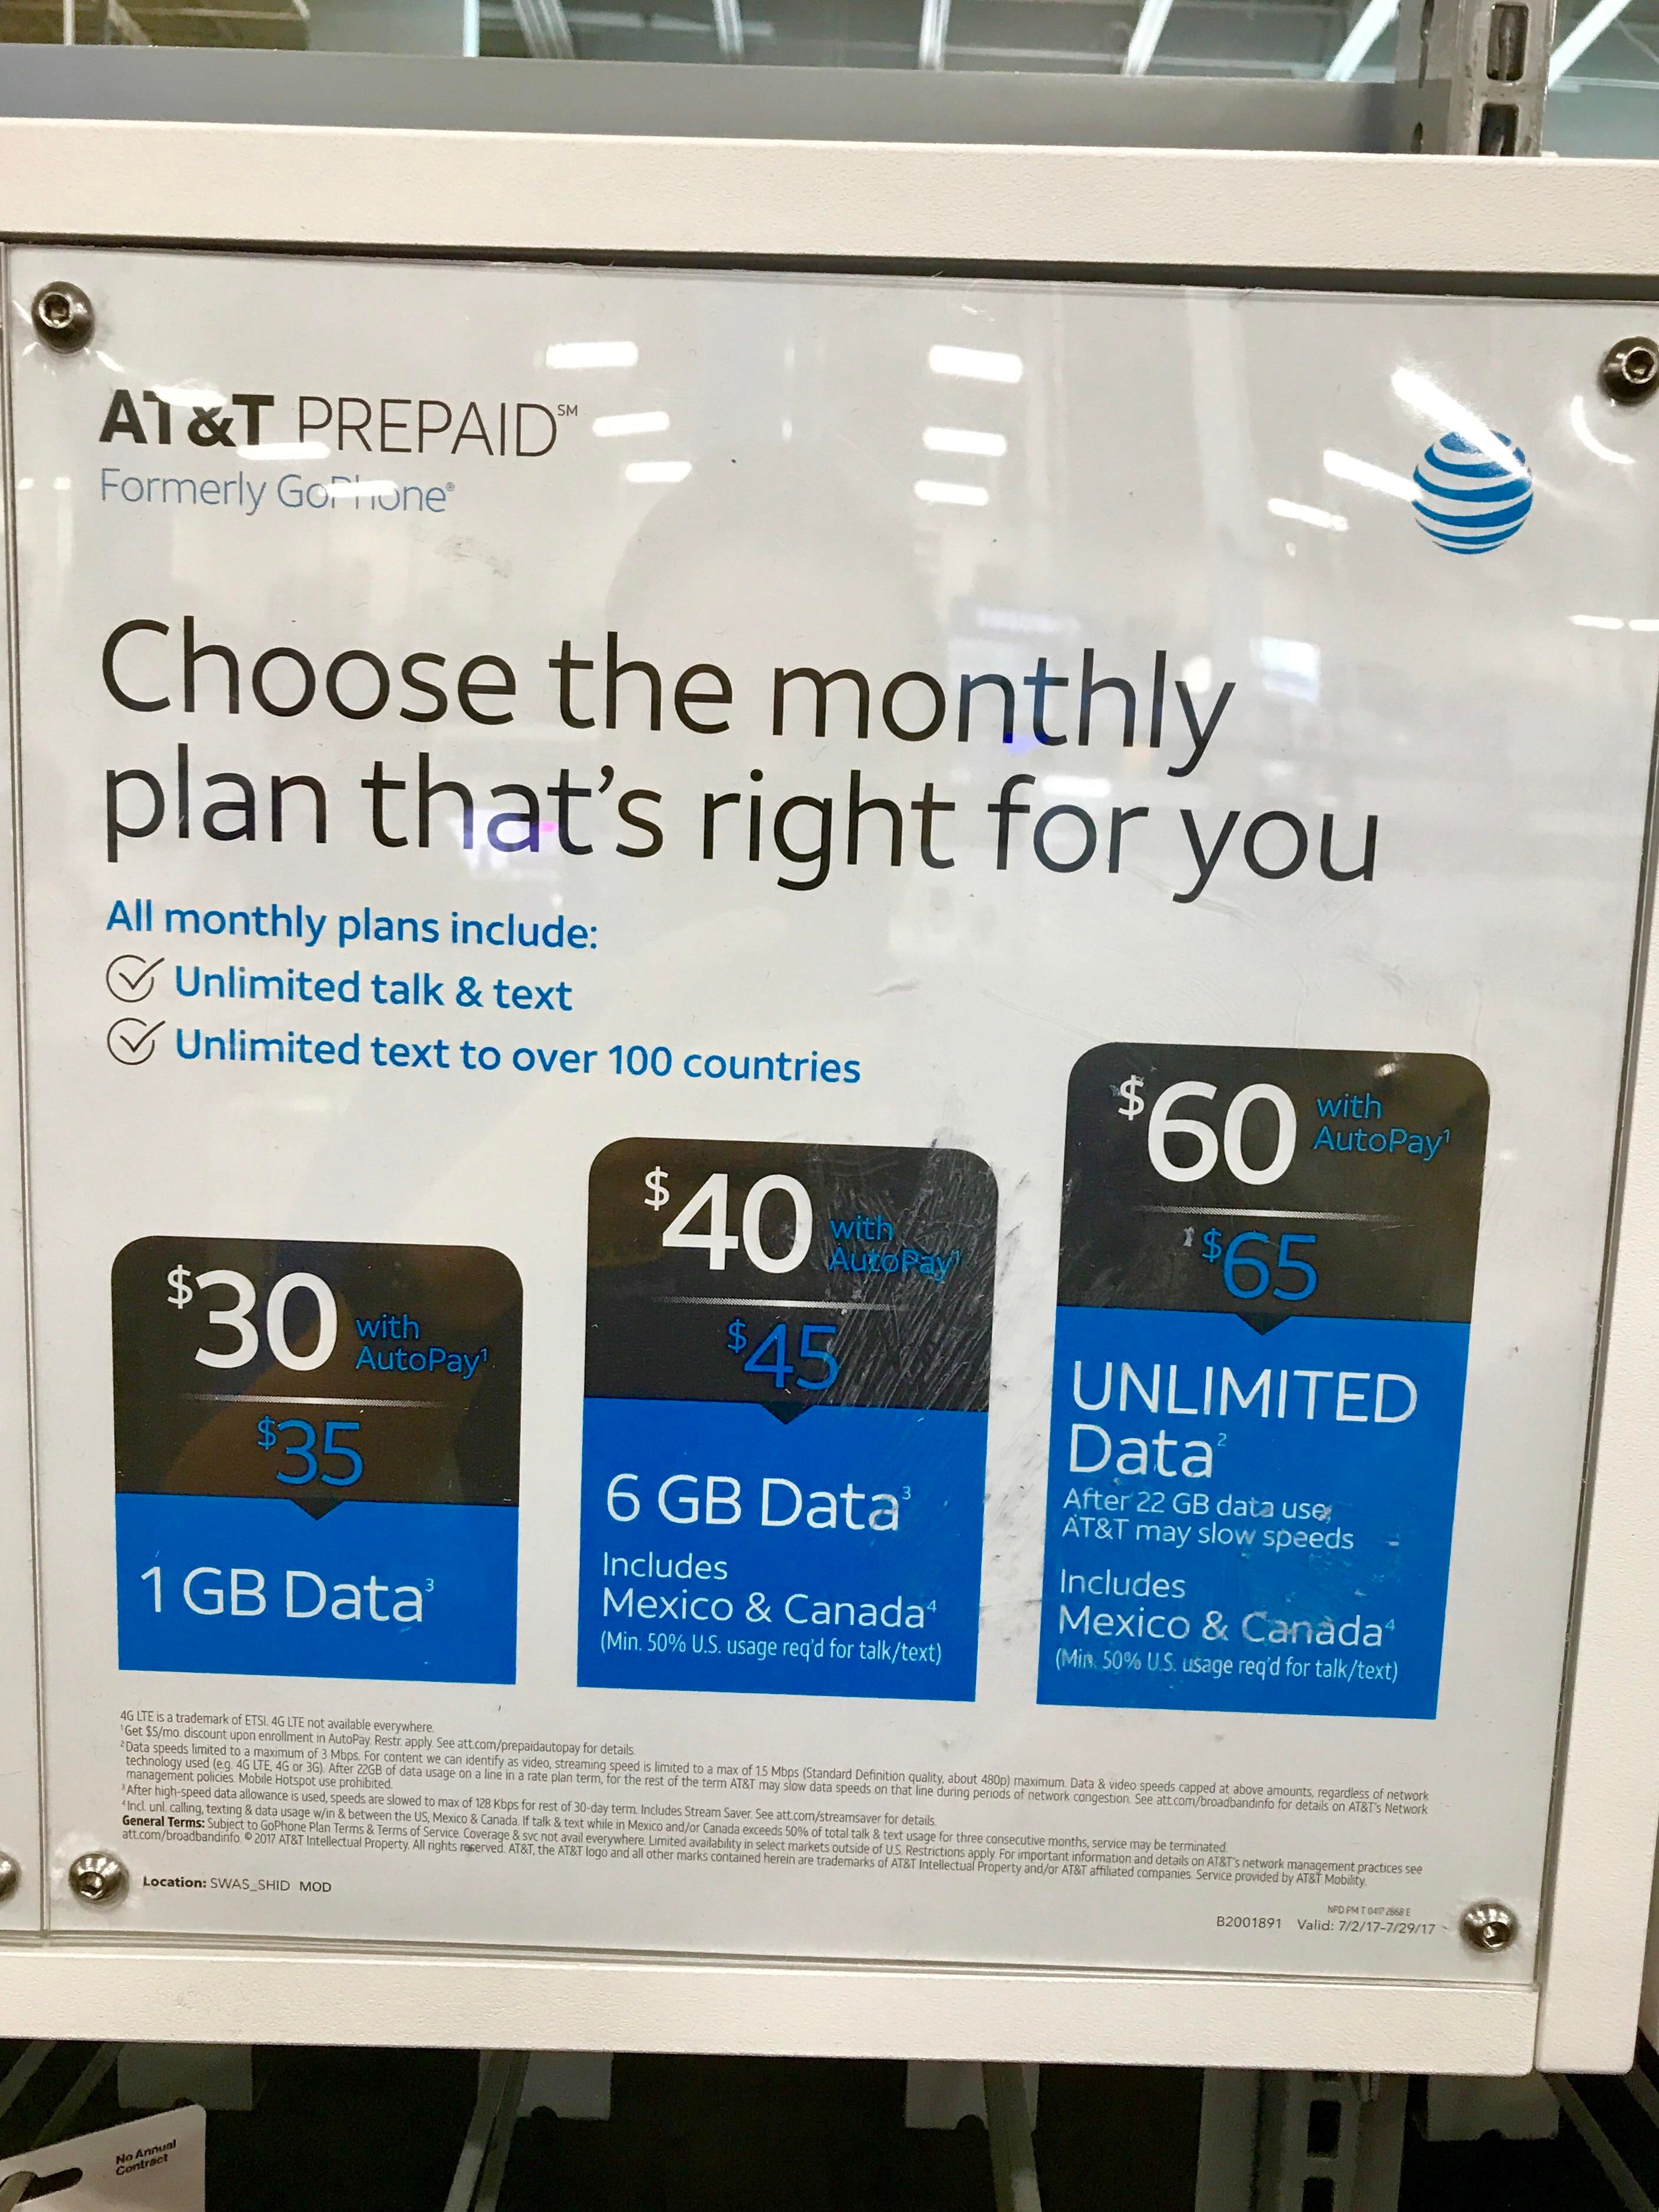 AT&T now offers new prepaid monthly plans, GoPhone may soon be rebranded